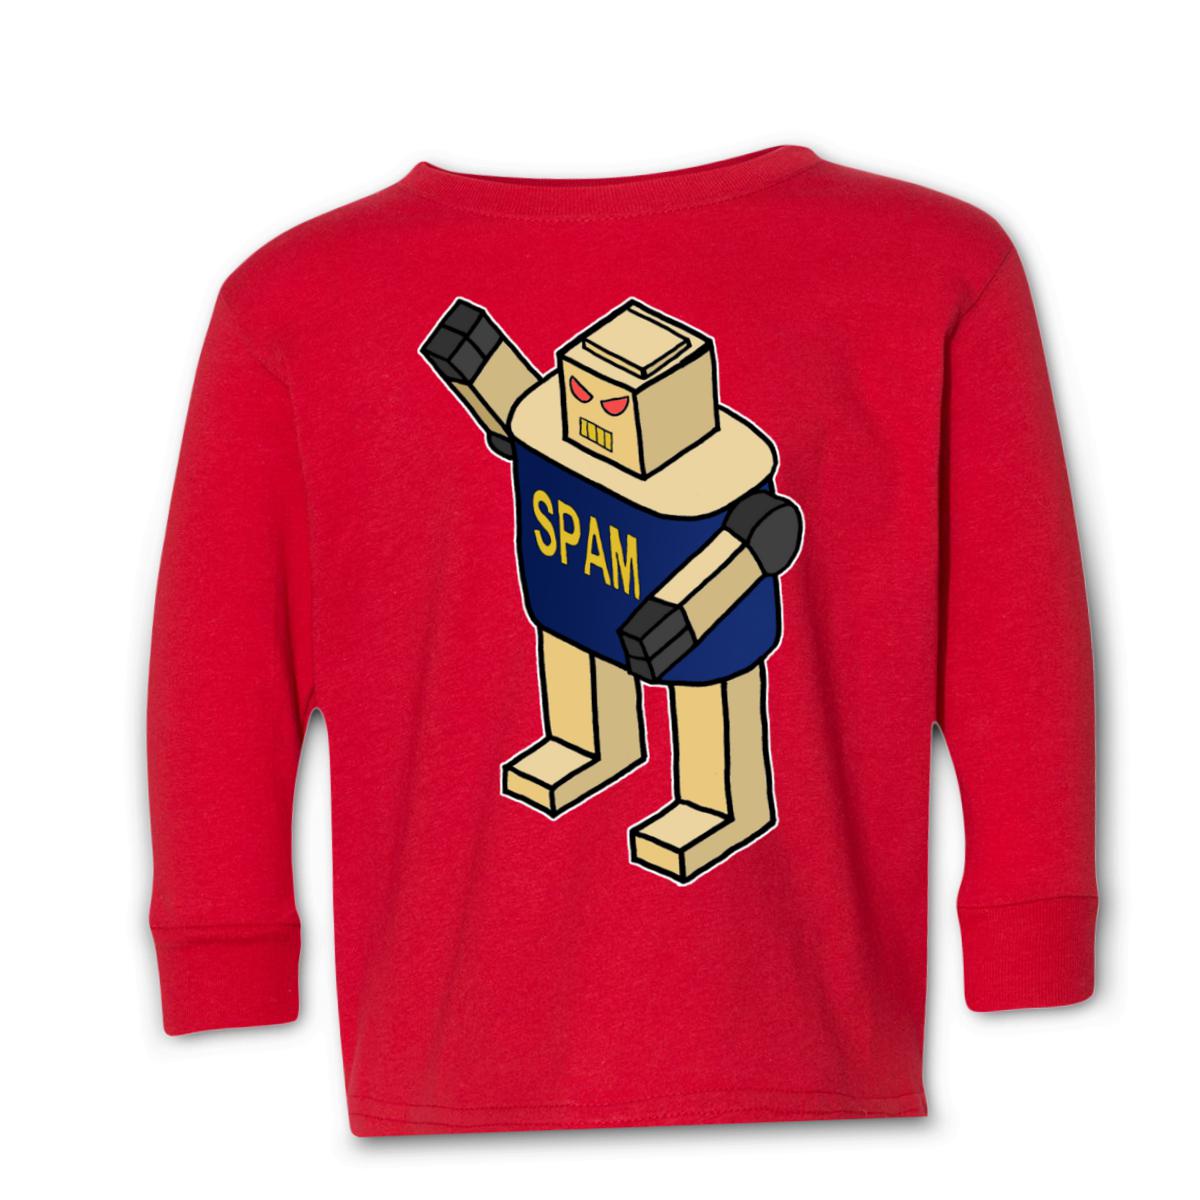 Spam Bot Kid's Long Sleeve Tee Small red